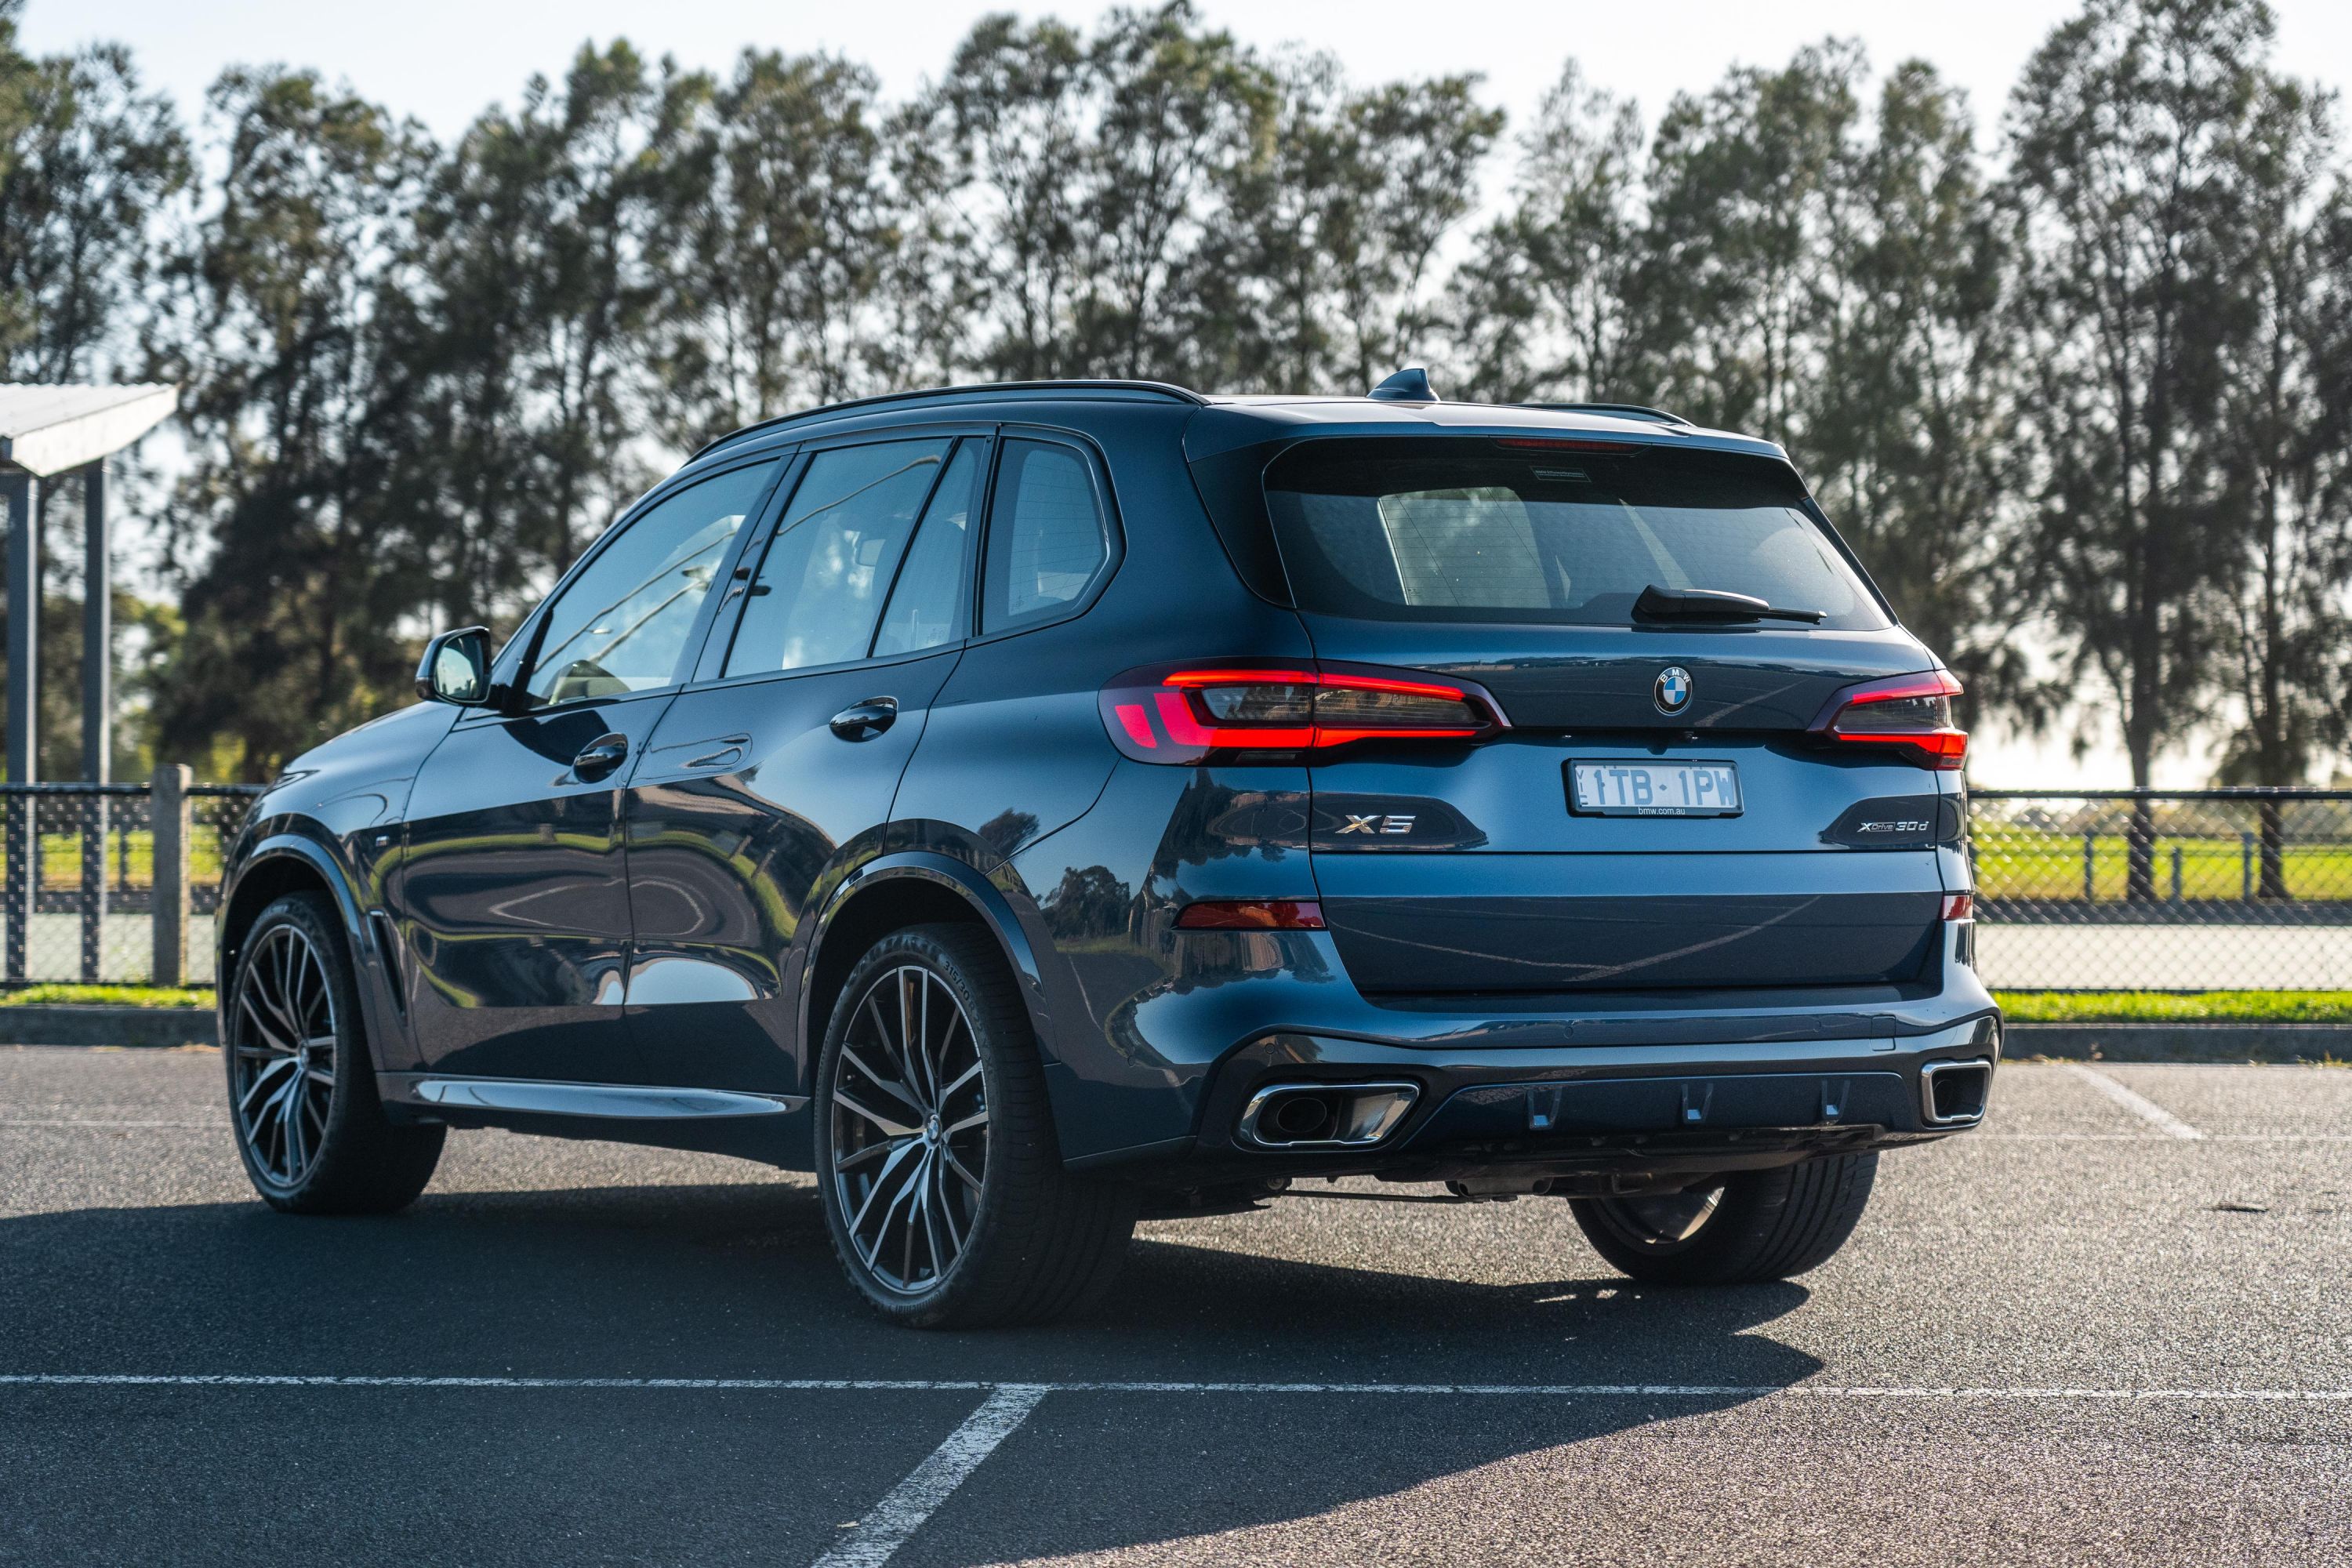 BMW X5 (2023) review: extreme makeover, SUV edition